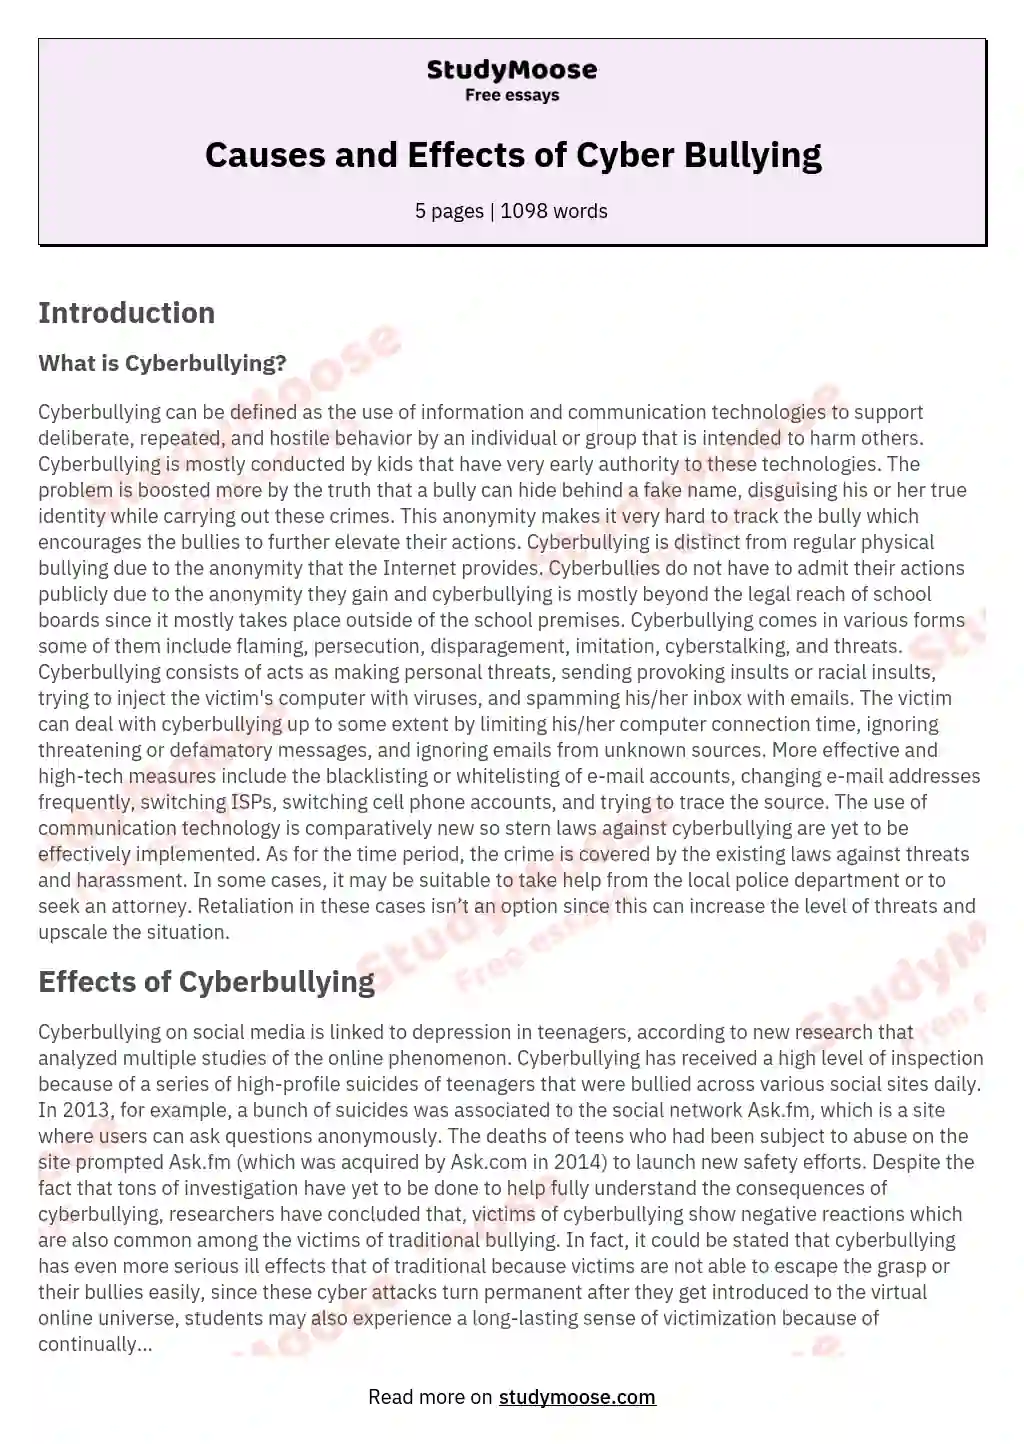 persuasive essay about cyber bullying example